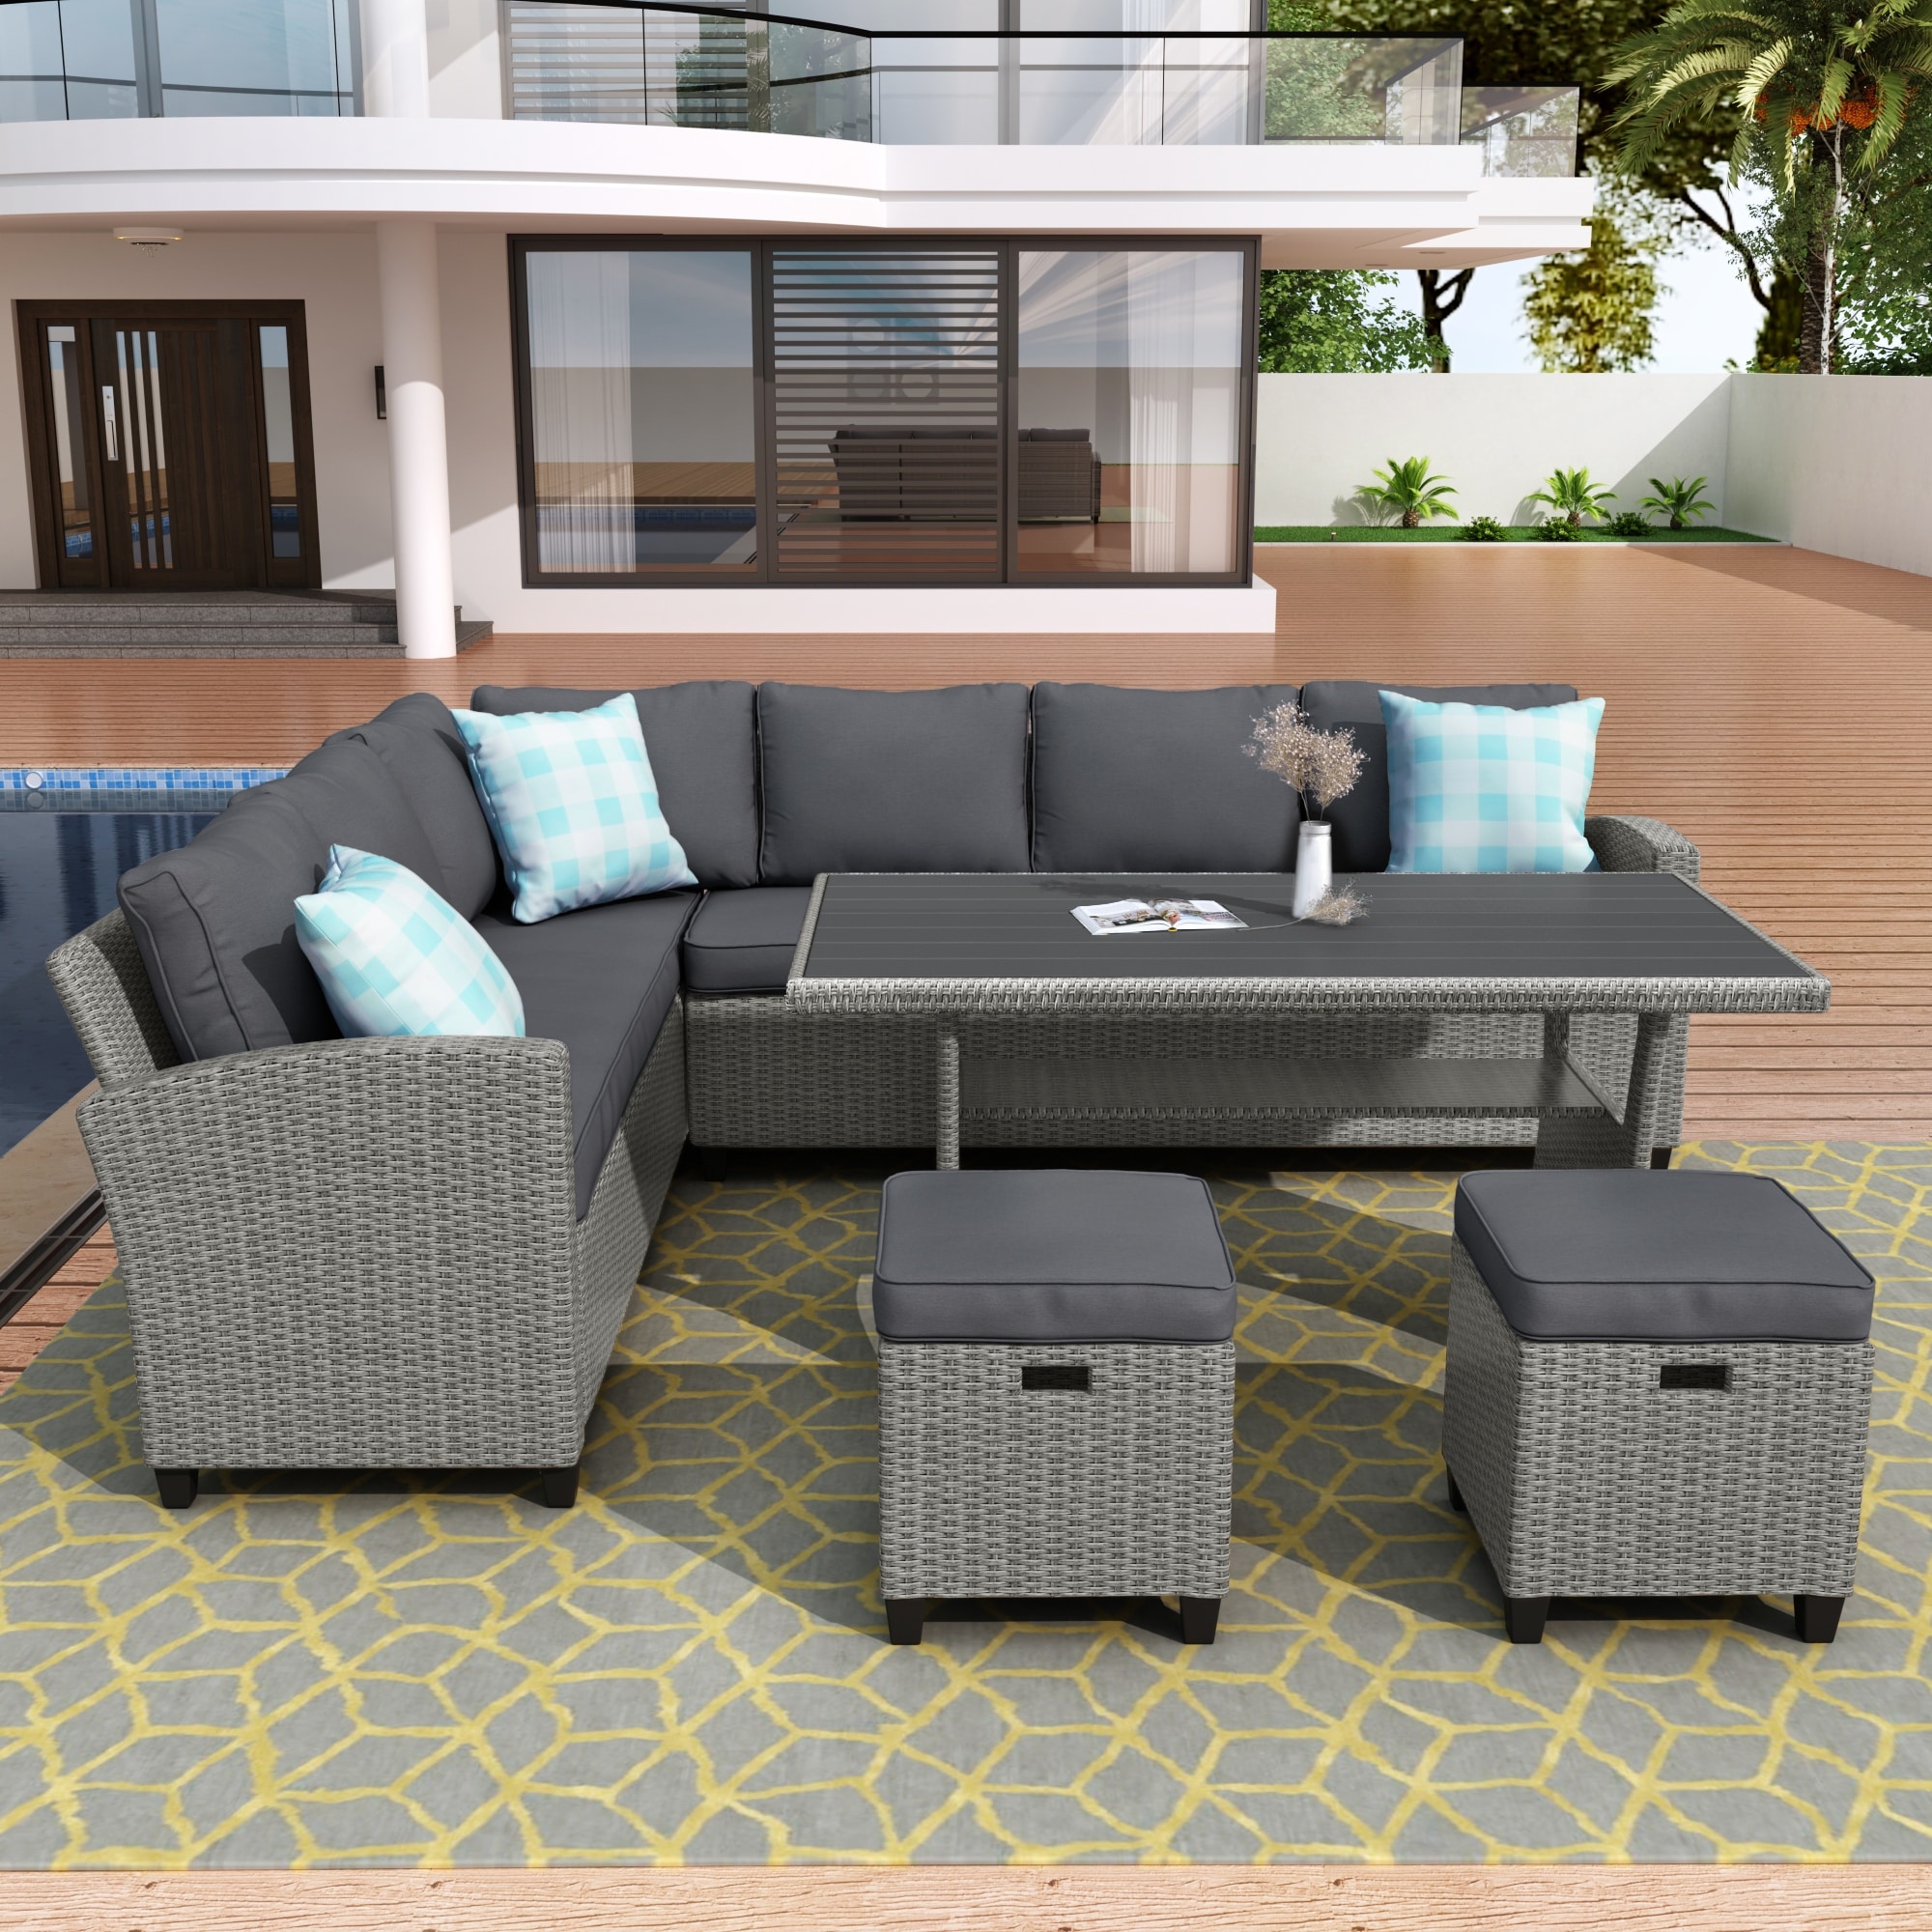 Gray 5 Piece Patio Furniture Set  Weatherproof Resin Wicker With Steel Frame  Thickened Cushioning And Lumbar Support